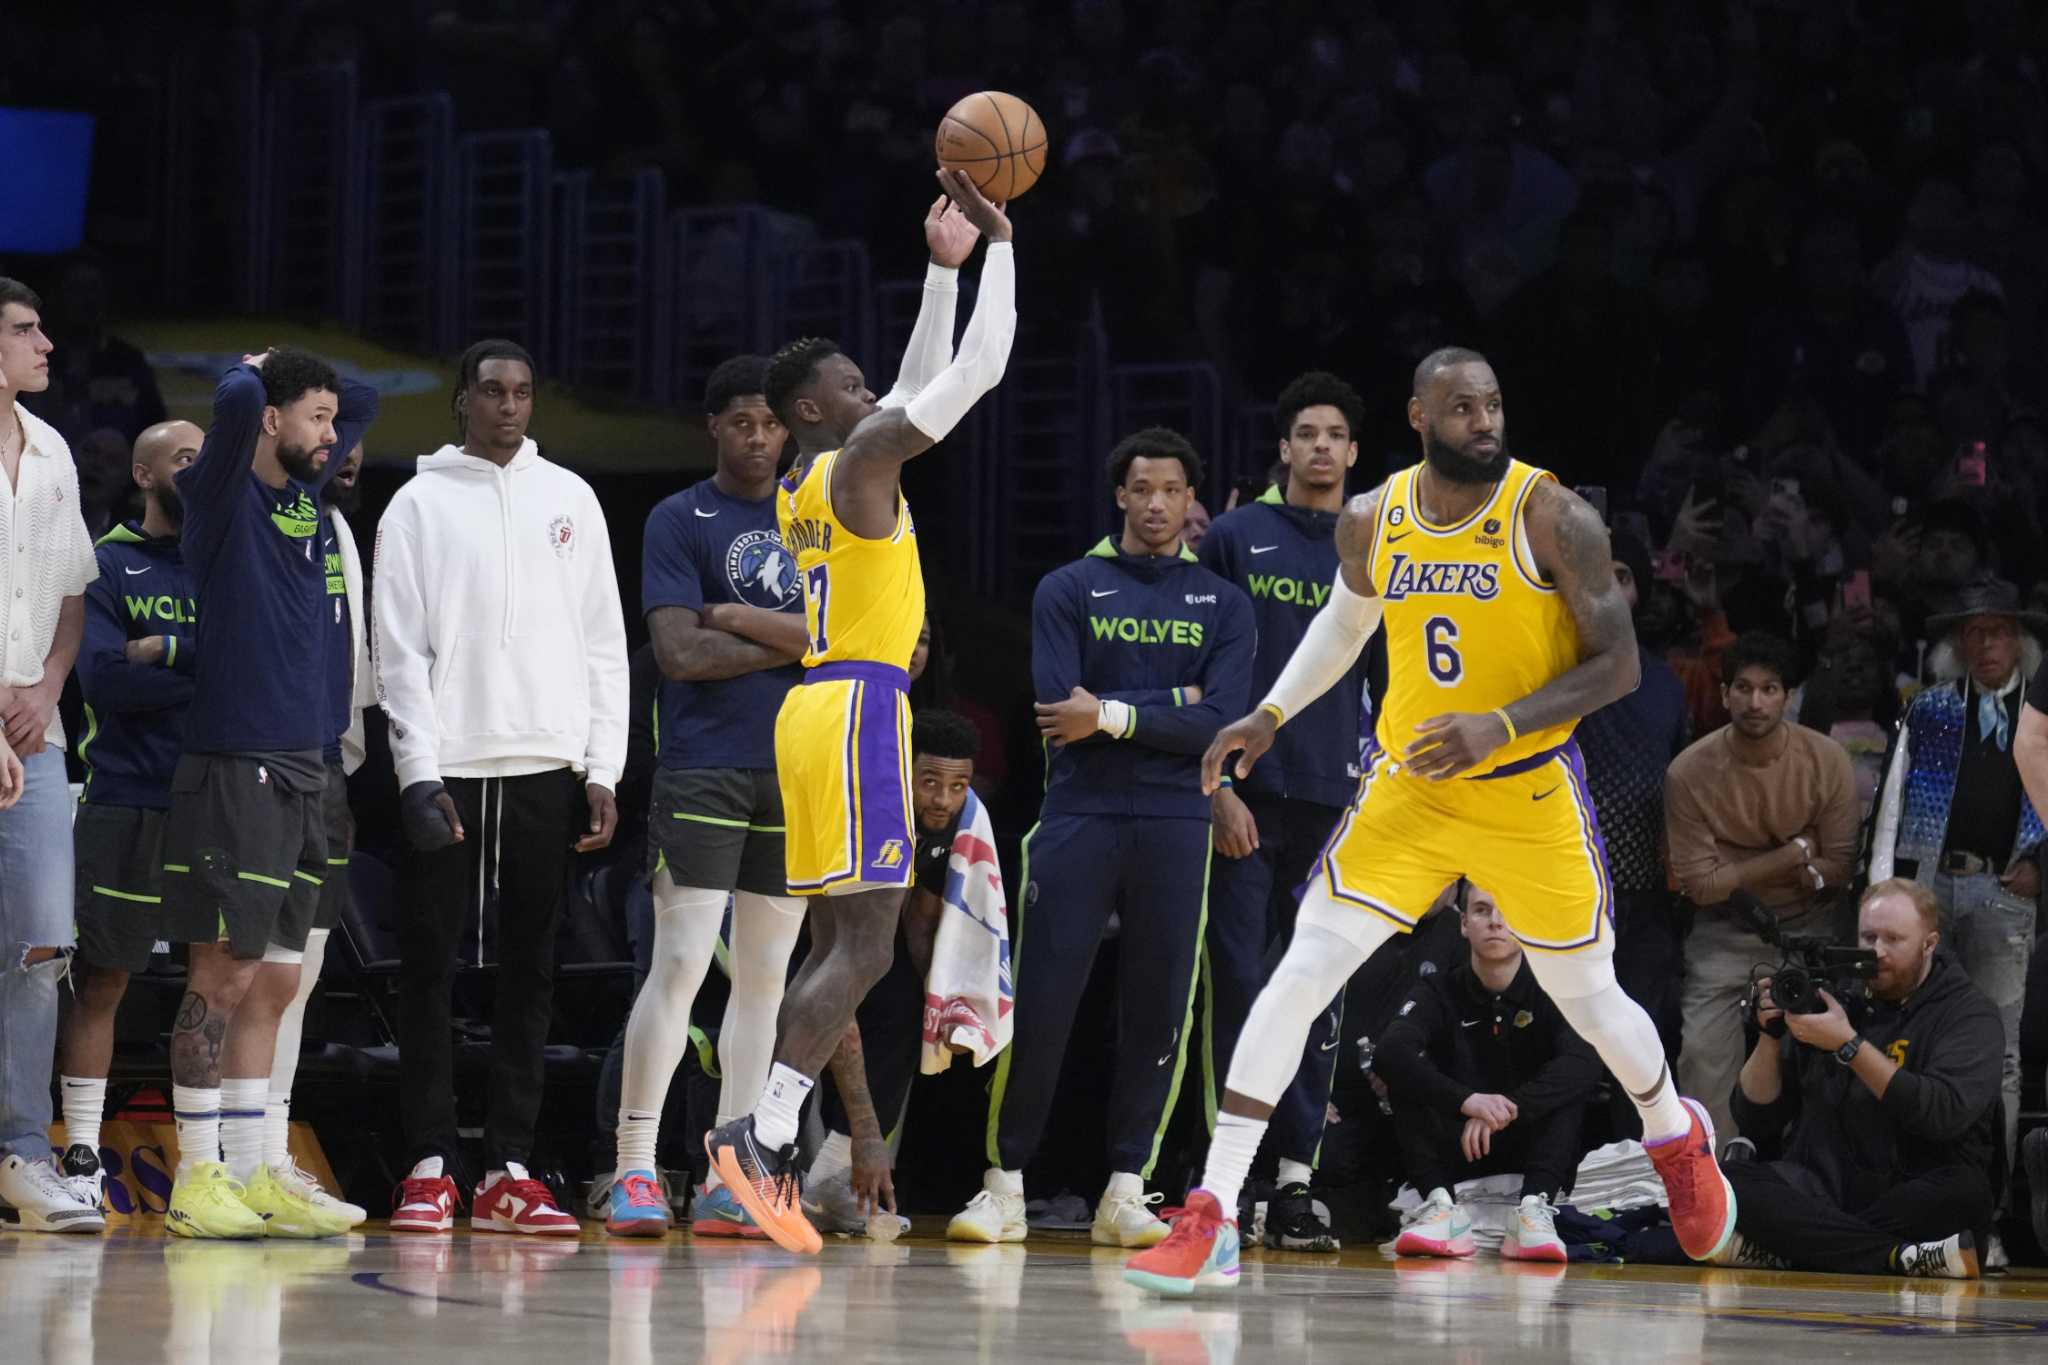 Lakers outlast Wolves 108-102 in OT, advance to face Memphis – WWLP